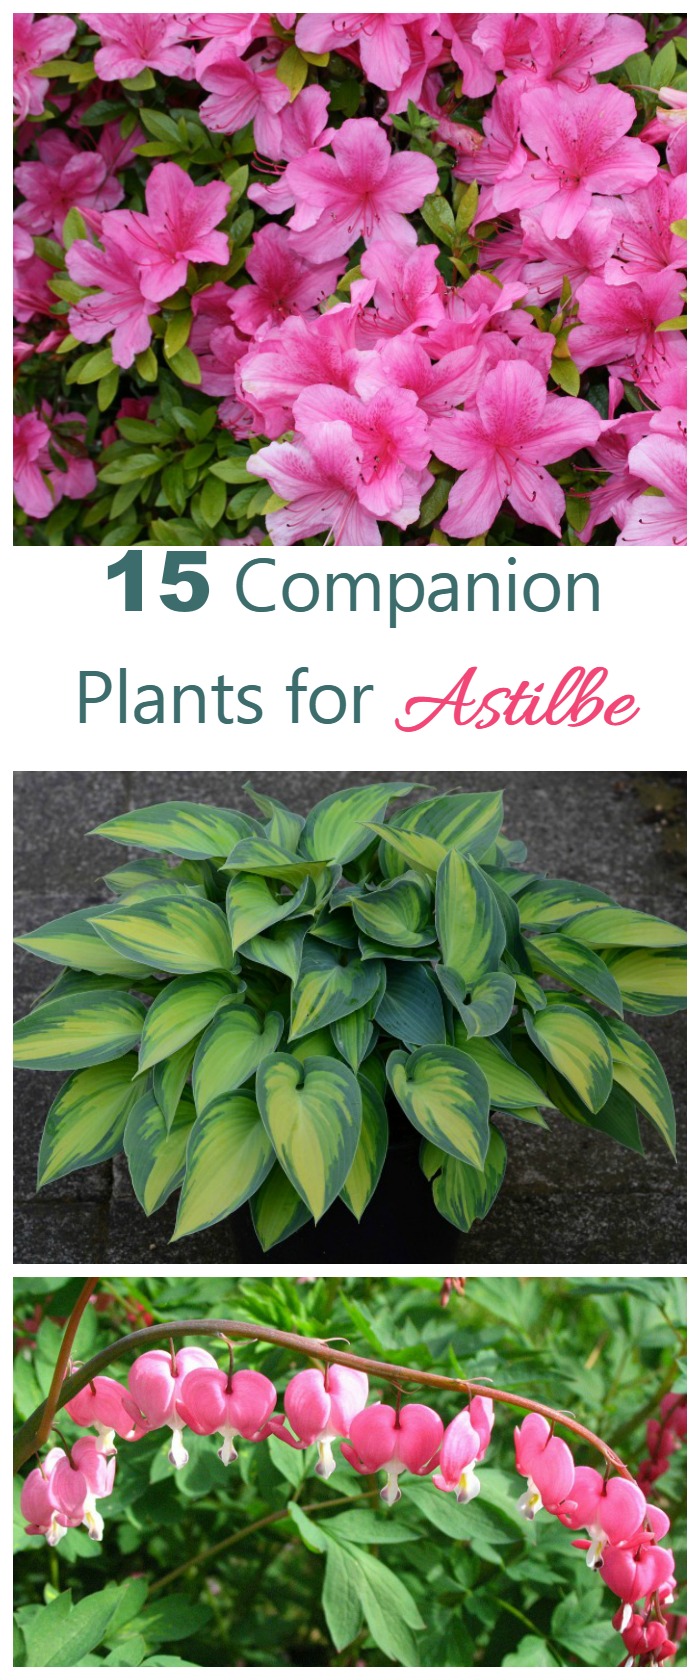 These 15 perennials and annuals make great astilbe companion plants. Most love the same shade and moisture requirements and make a great looking garden bed.